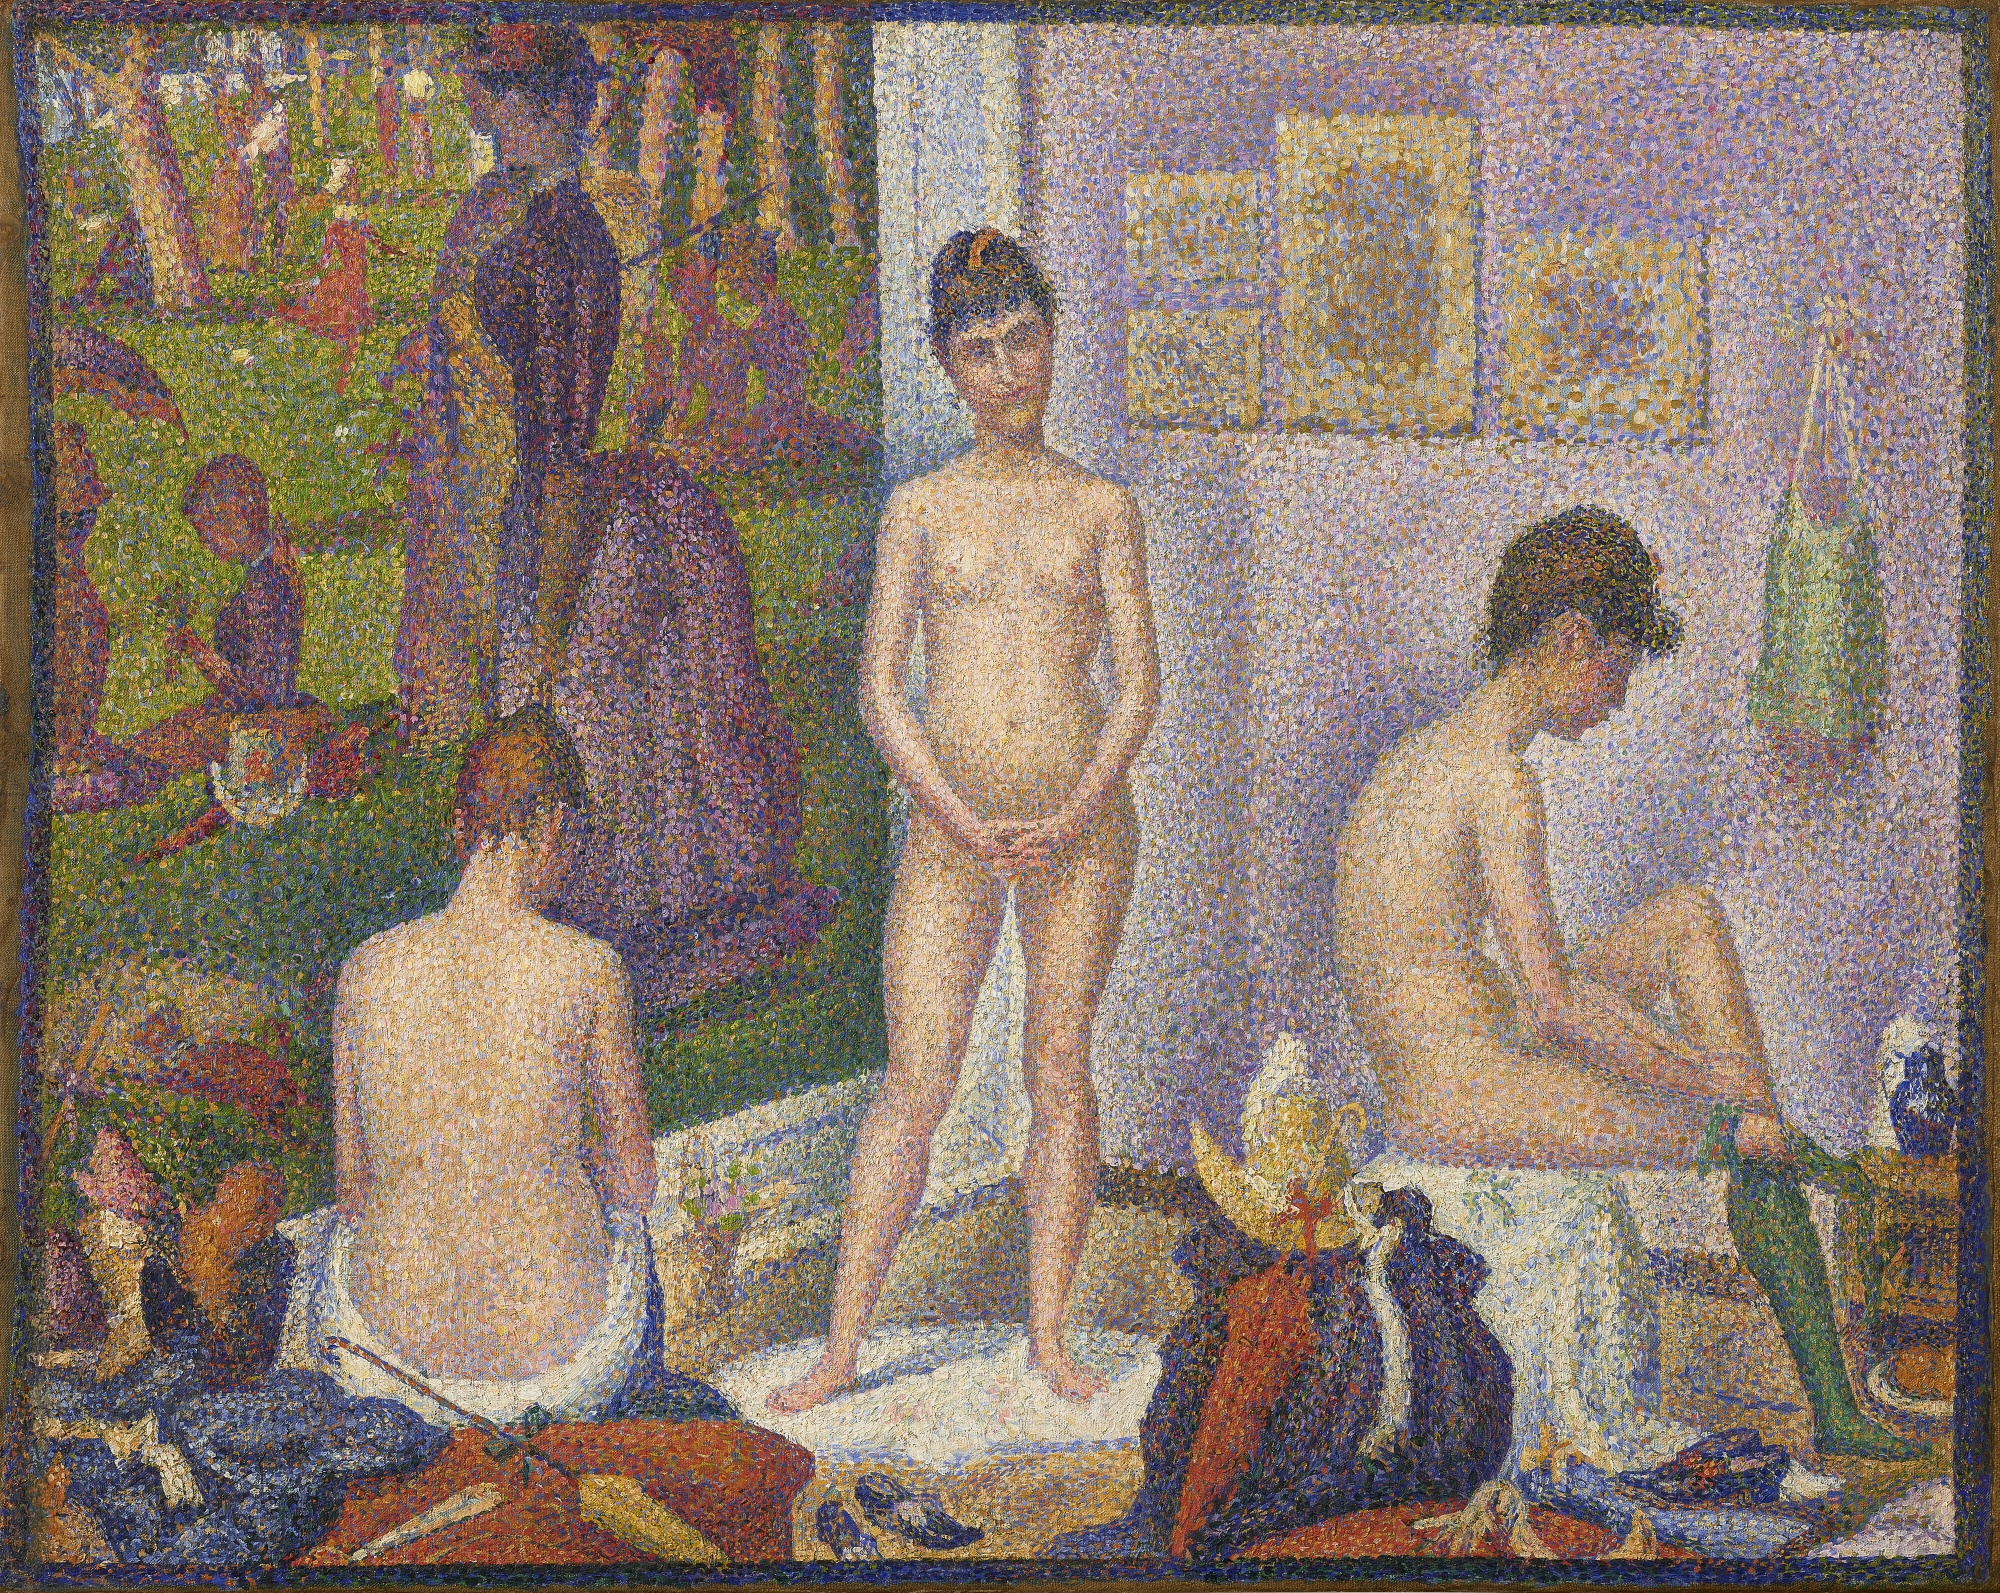 Les Poseuses, Ensemble (Petite version)&nbsp;(1888) by Georges Seurat is anticipated to sell for $100 million or more.